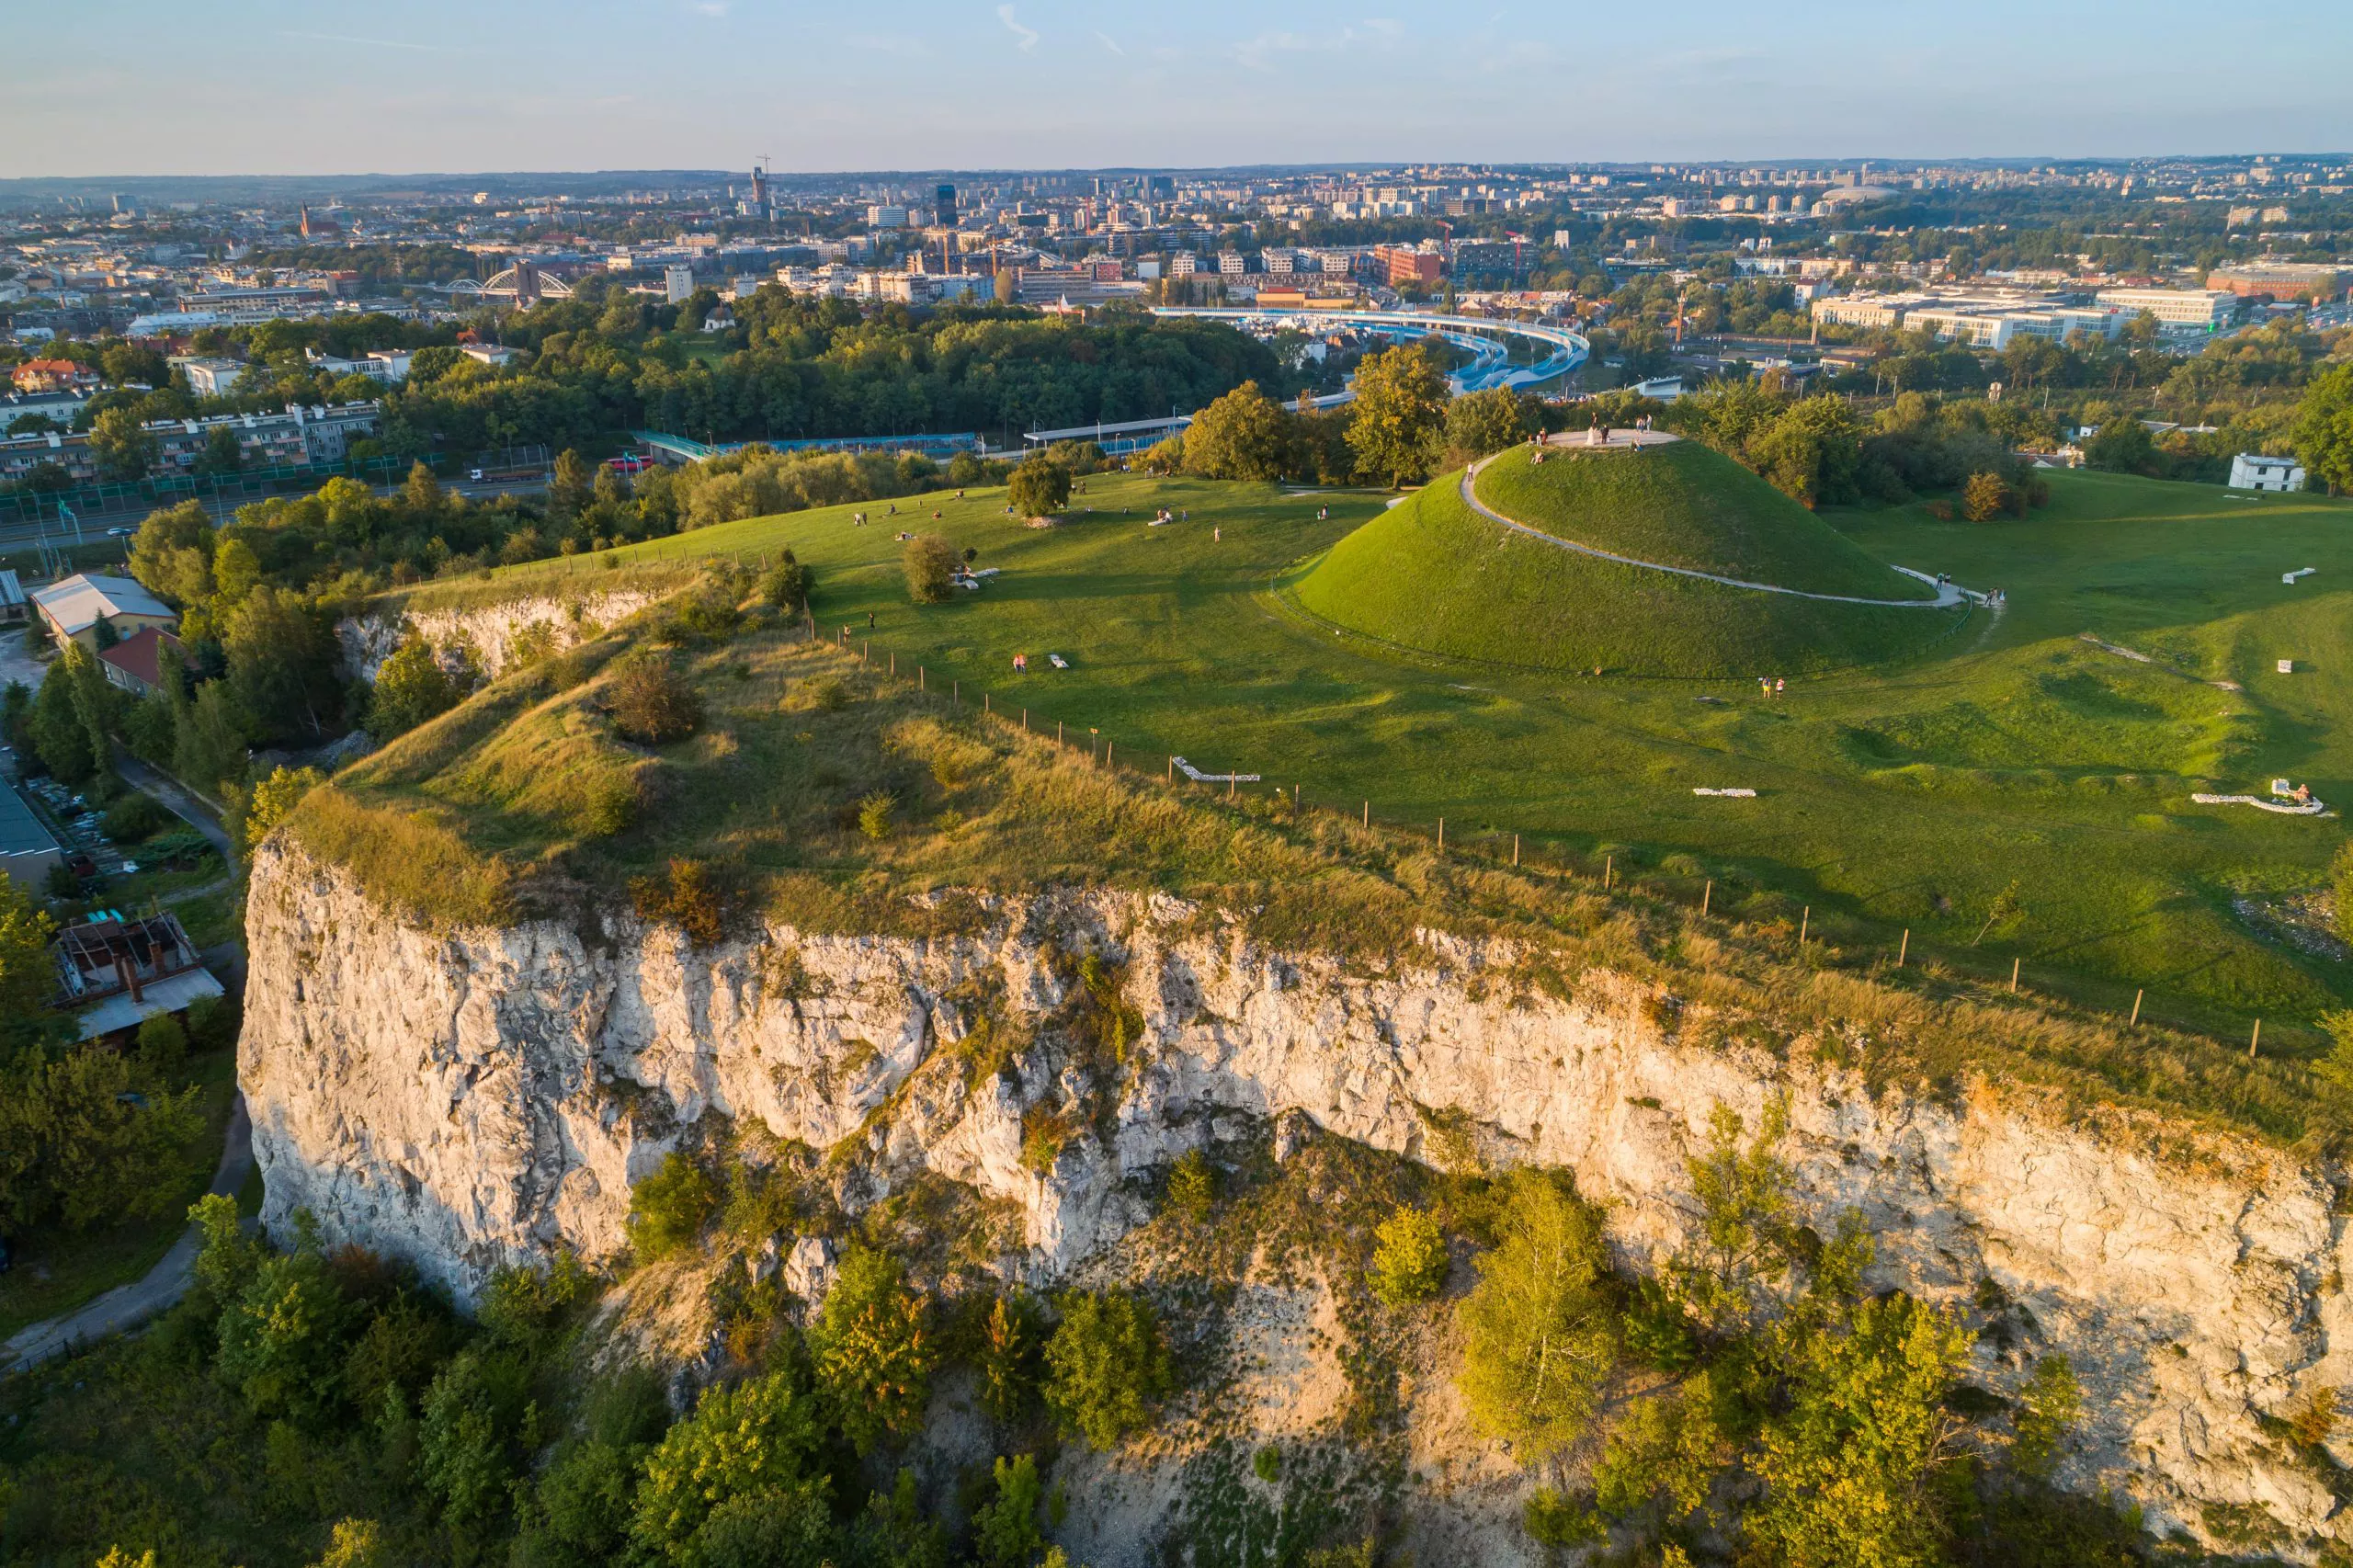 In this aerial view, Mound of King Krak (Krakus) stands among the green turf on the left, above the vertical limestone cliffs of Liban Quarry. The mottle in the distance are the eastern districts of Kraków, visible under an overcast sky.